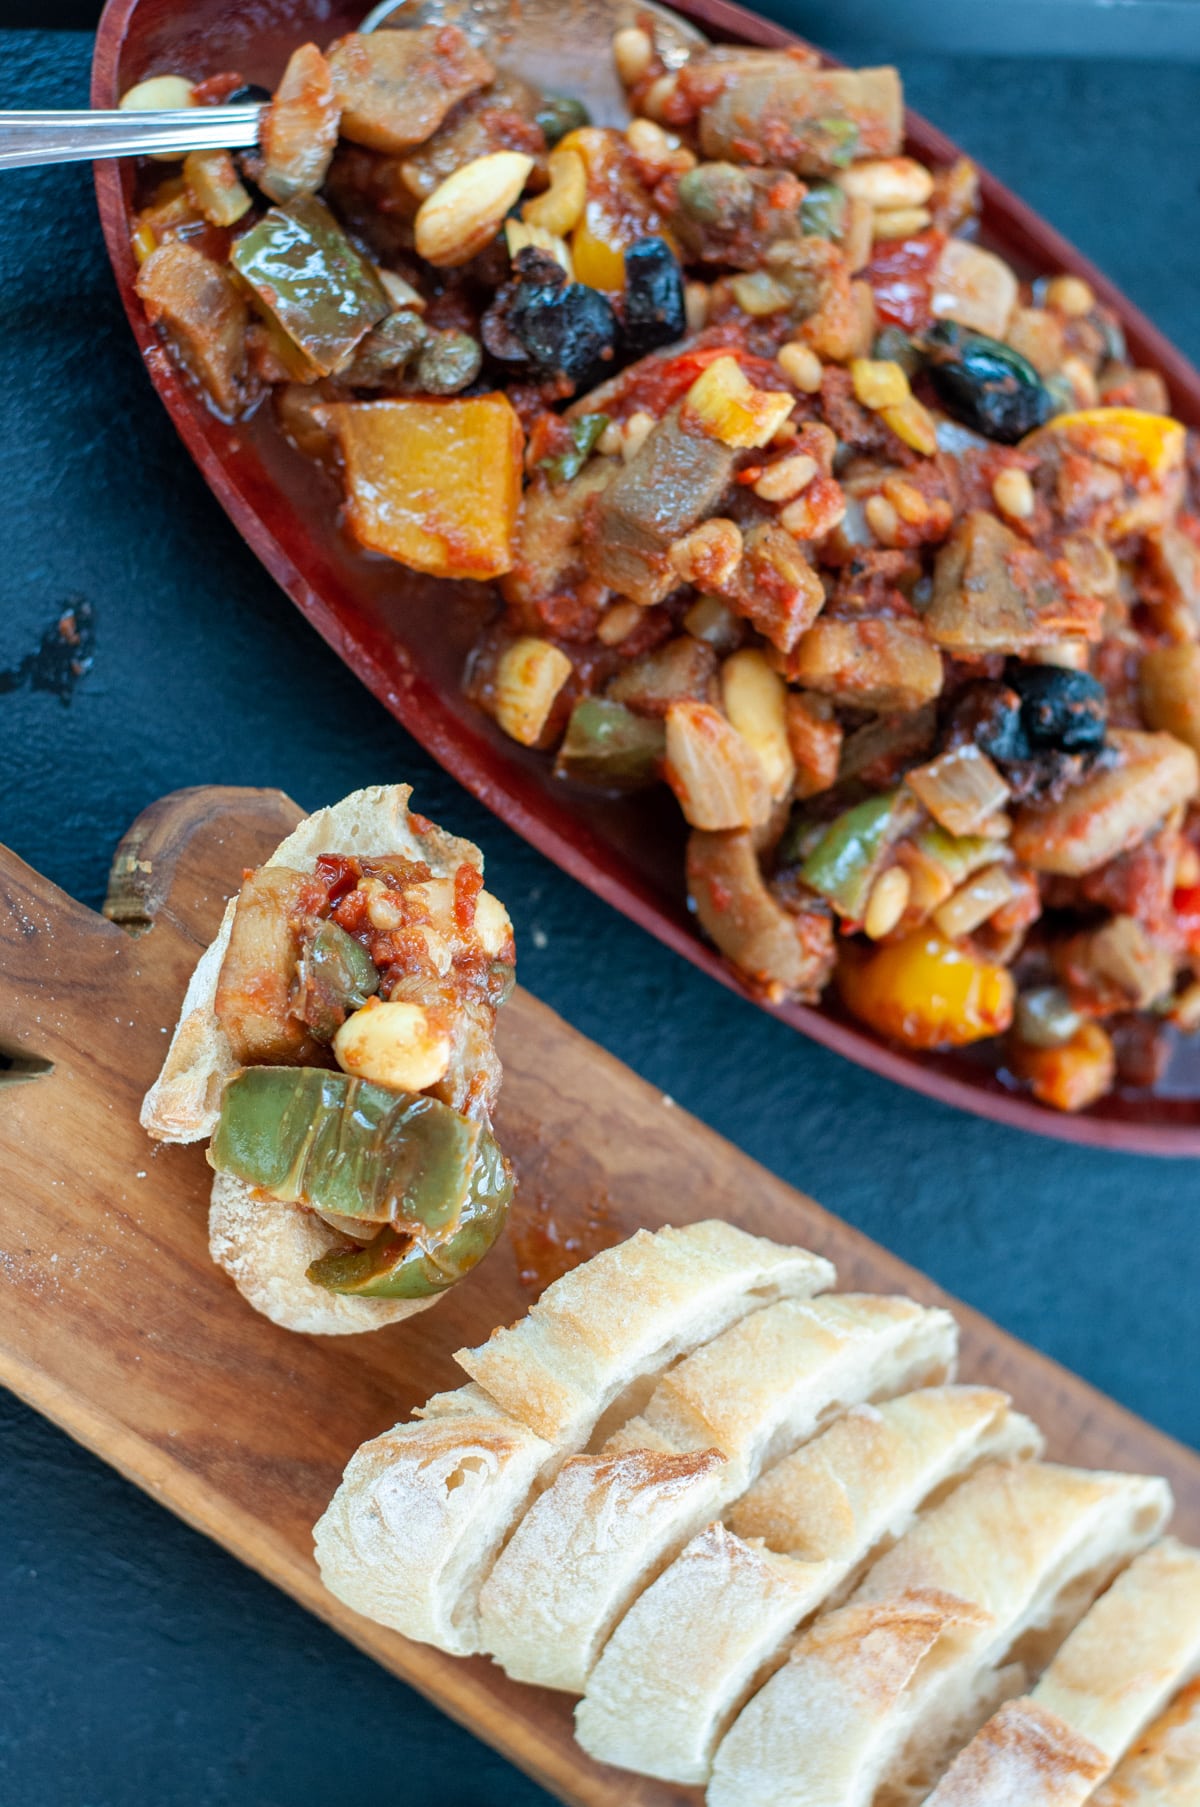 Vegetable caponata on a try and on a piece of crusty bread